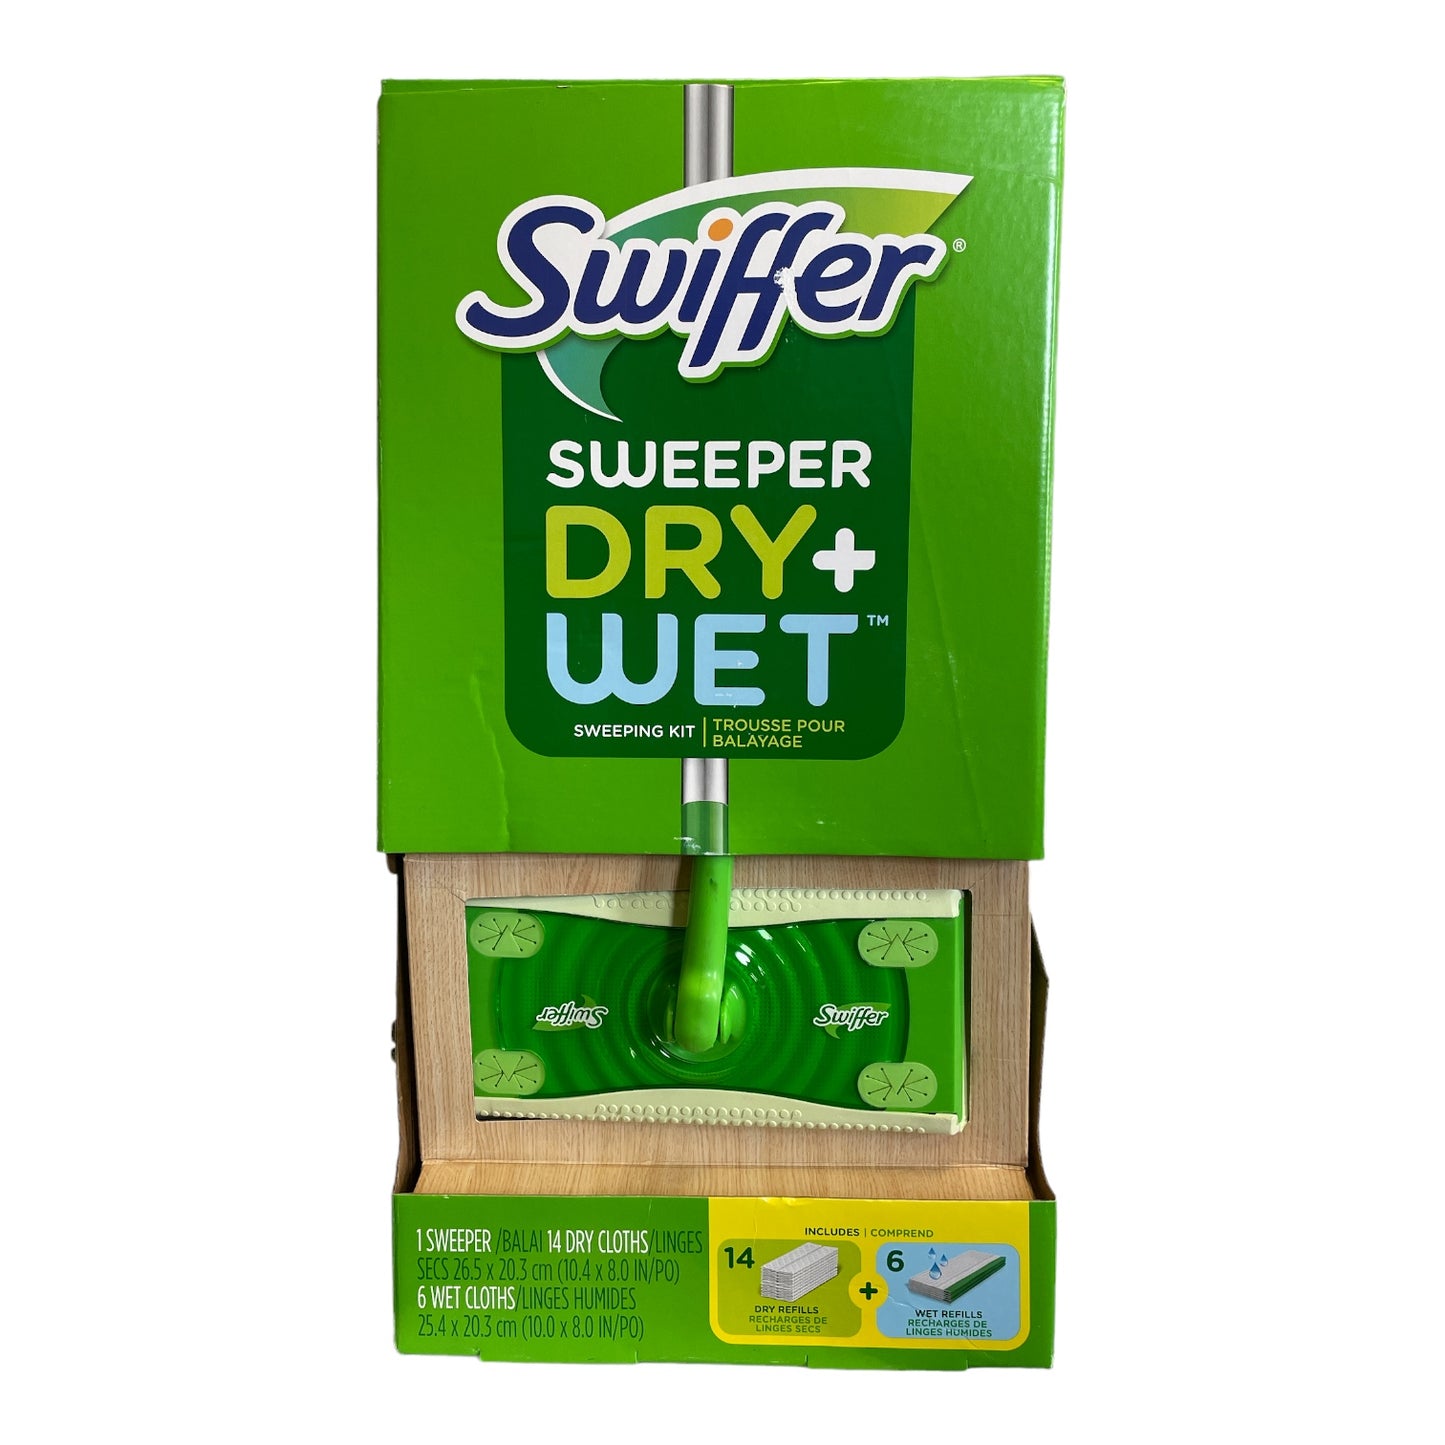 Swiffer Sweep Dry + Wet, Sweeping Kit, Includes Wet & Dry Refills